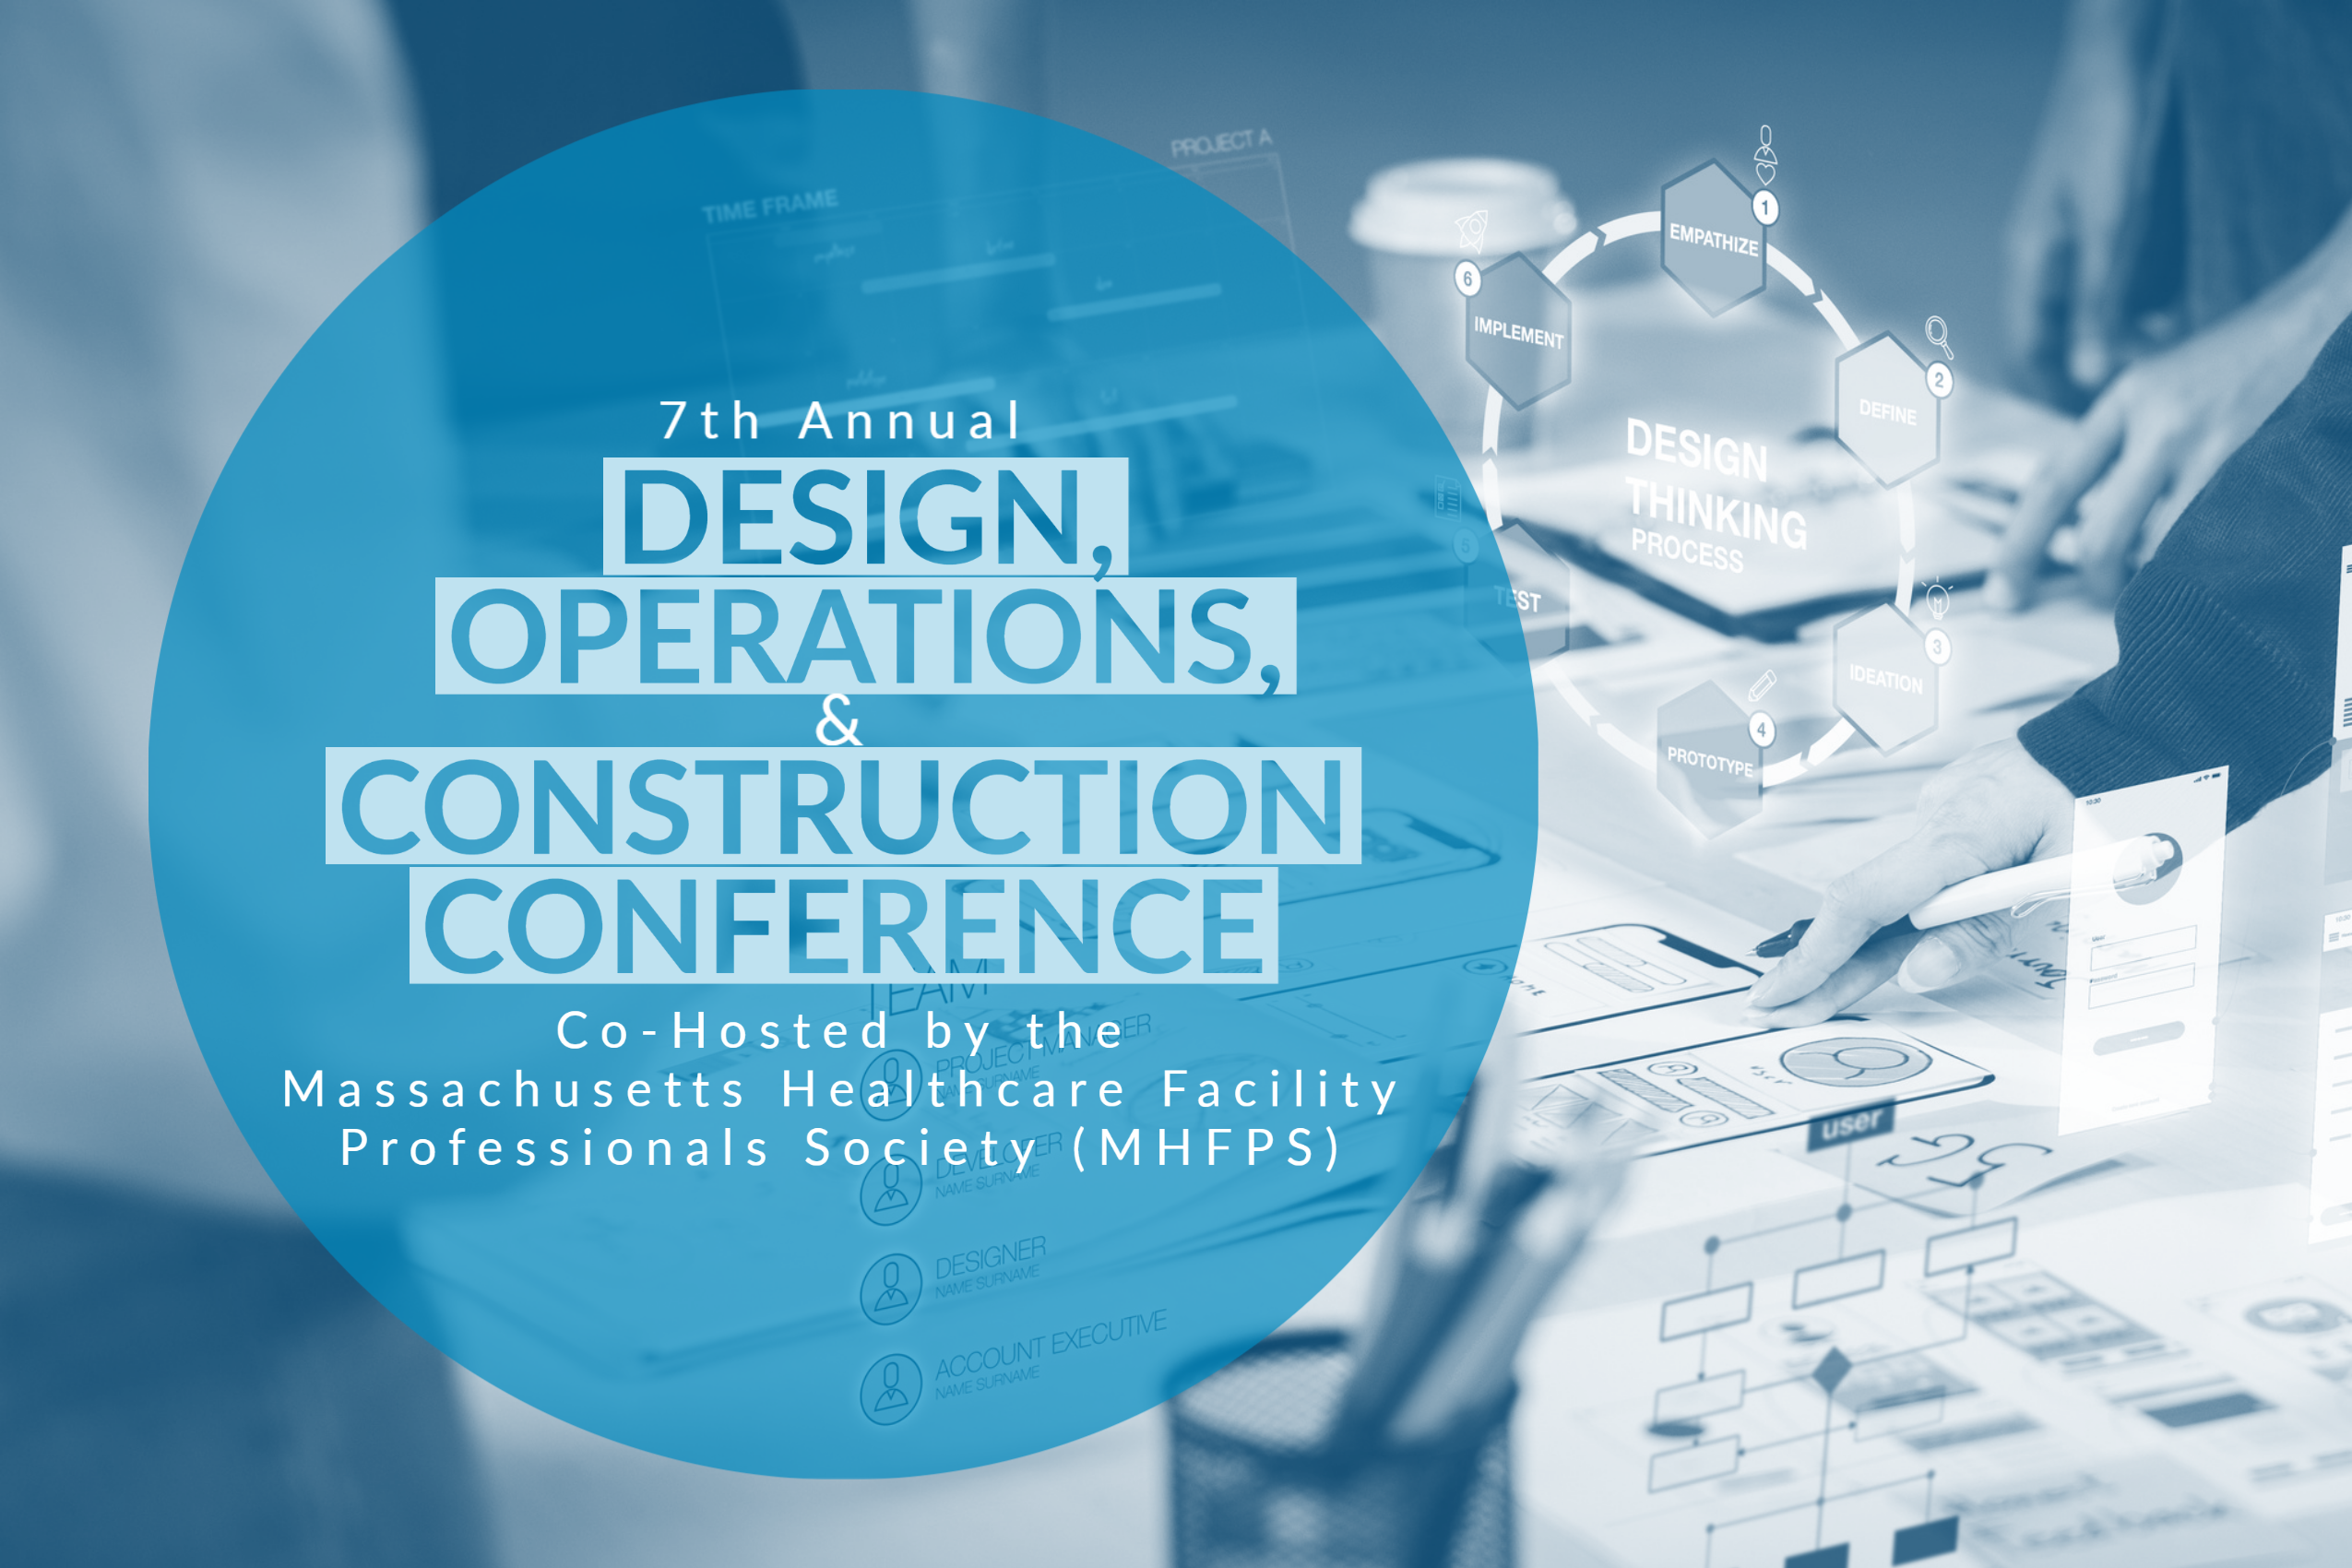 7th Annual Design, Operations, and Construction Conference. Co-hosted by the Massachusetts Healthcare Facility Professionals Society (MHFPS)